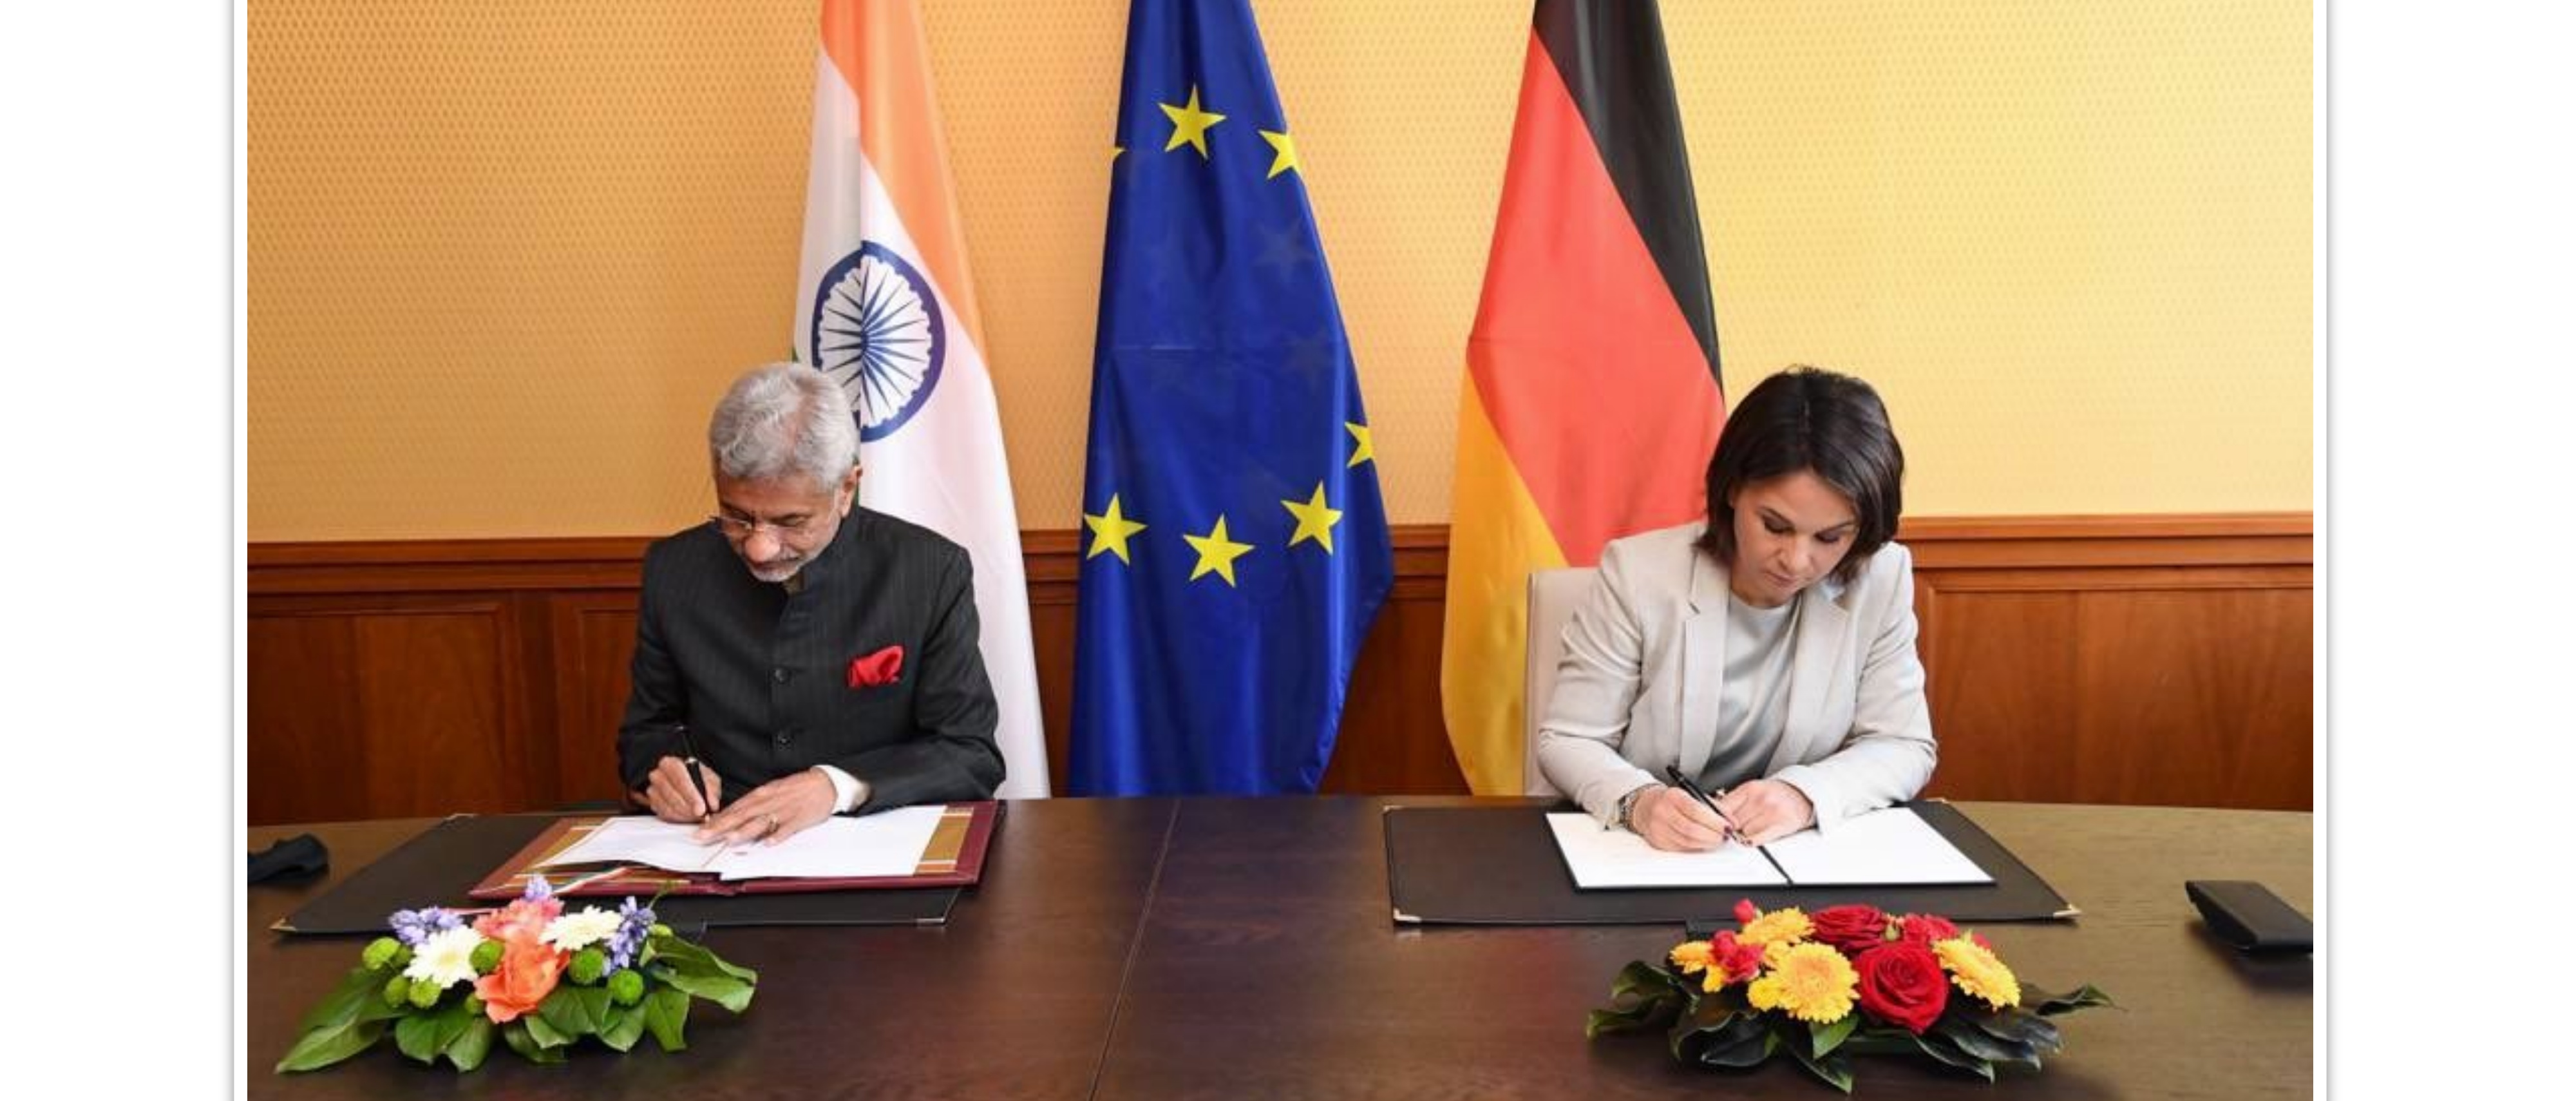  External Affairs Minister Dr. S. Jaishankar with Foreign Minister Annalena Baerbock at the 6th India-Germany Inter-Governmental Consultations